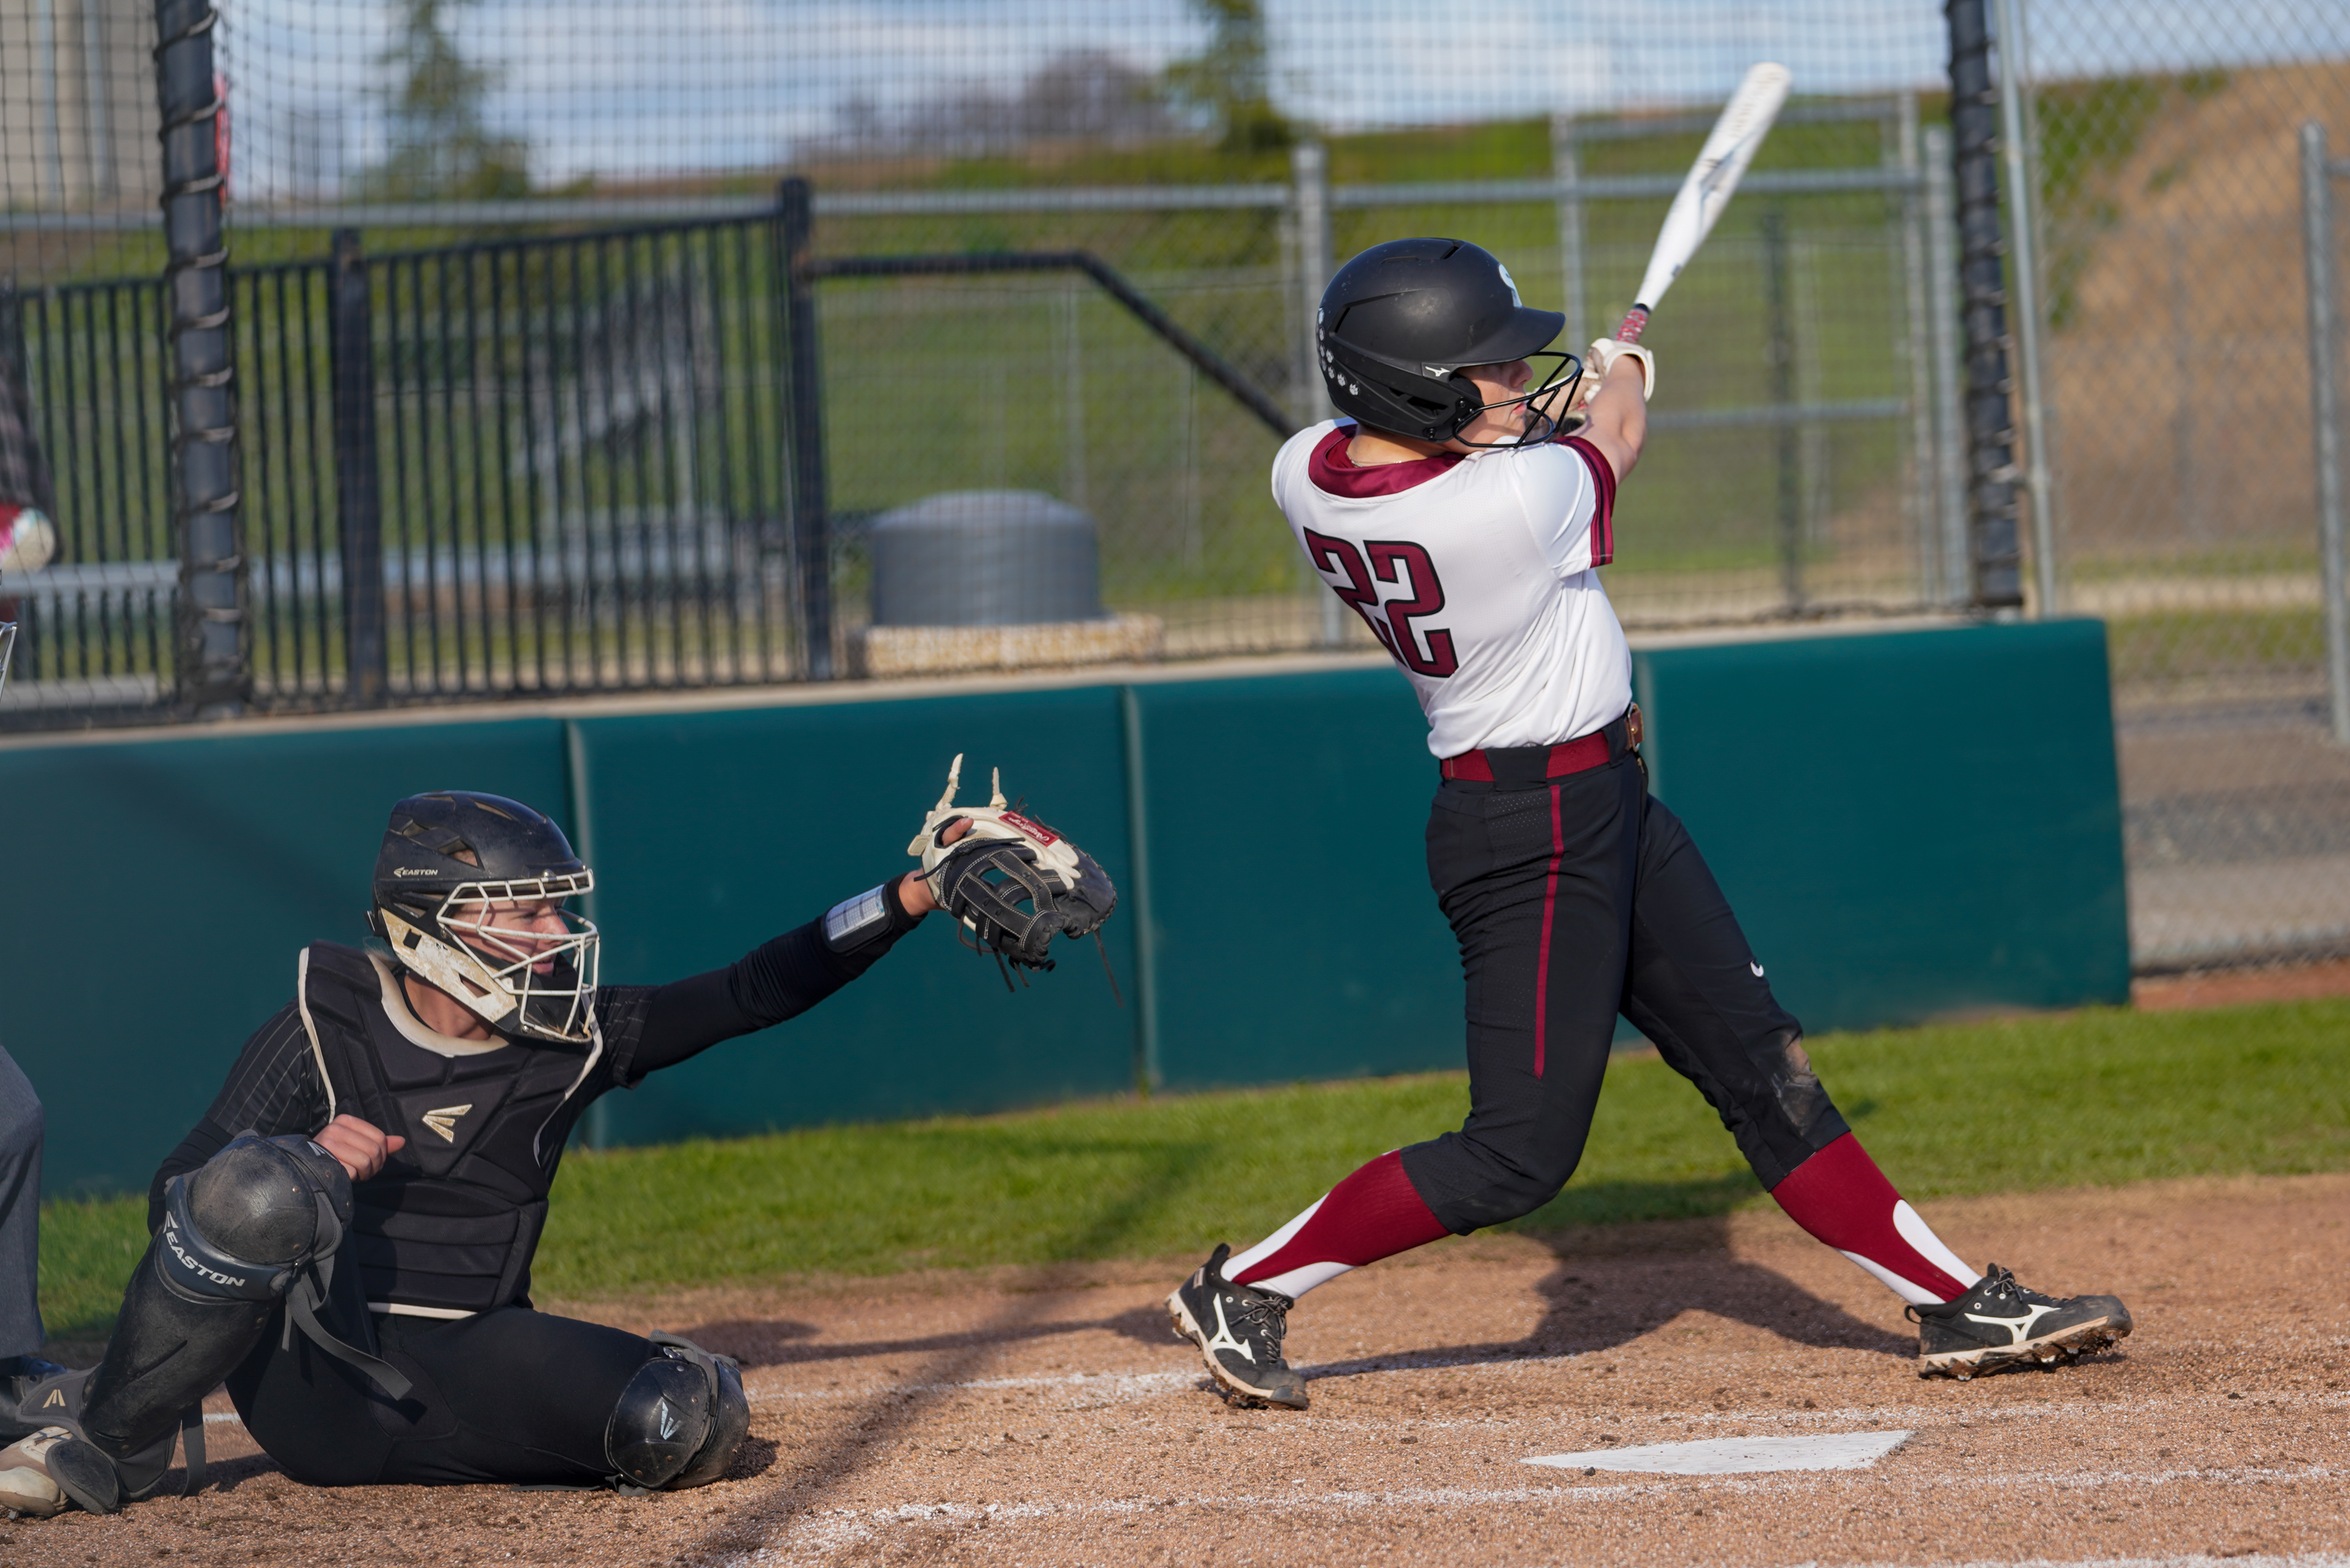 Sierra College freshman Maddy Redinger hit a home run and had three RBIs in three games at the State Championships last week. Credit: Frank Salerno Lenie's Pictures